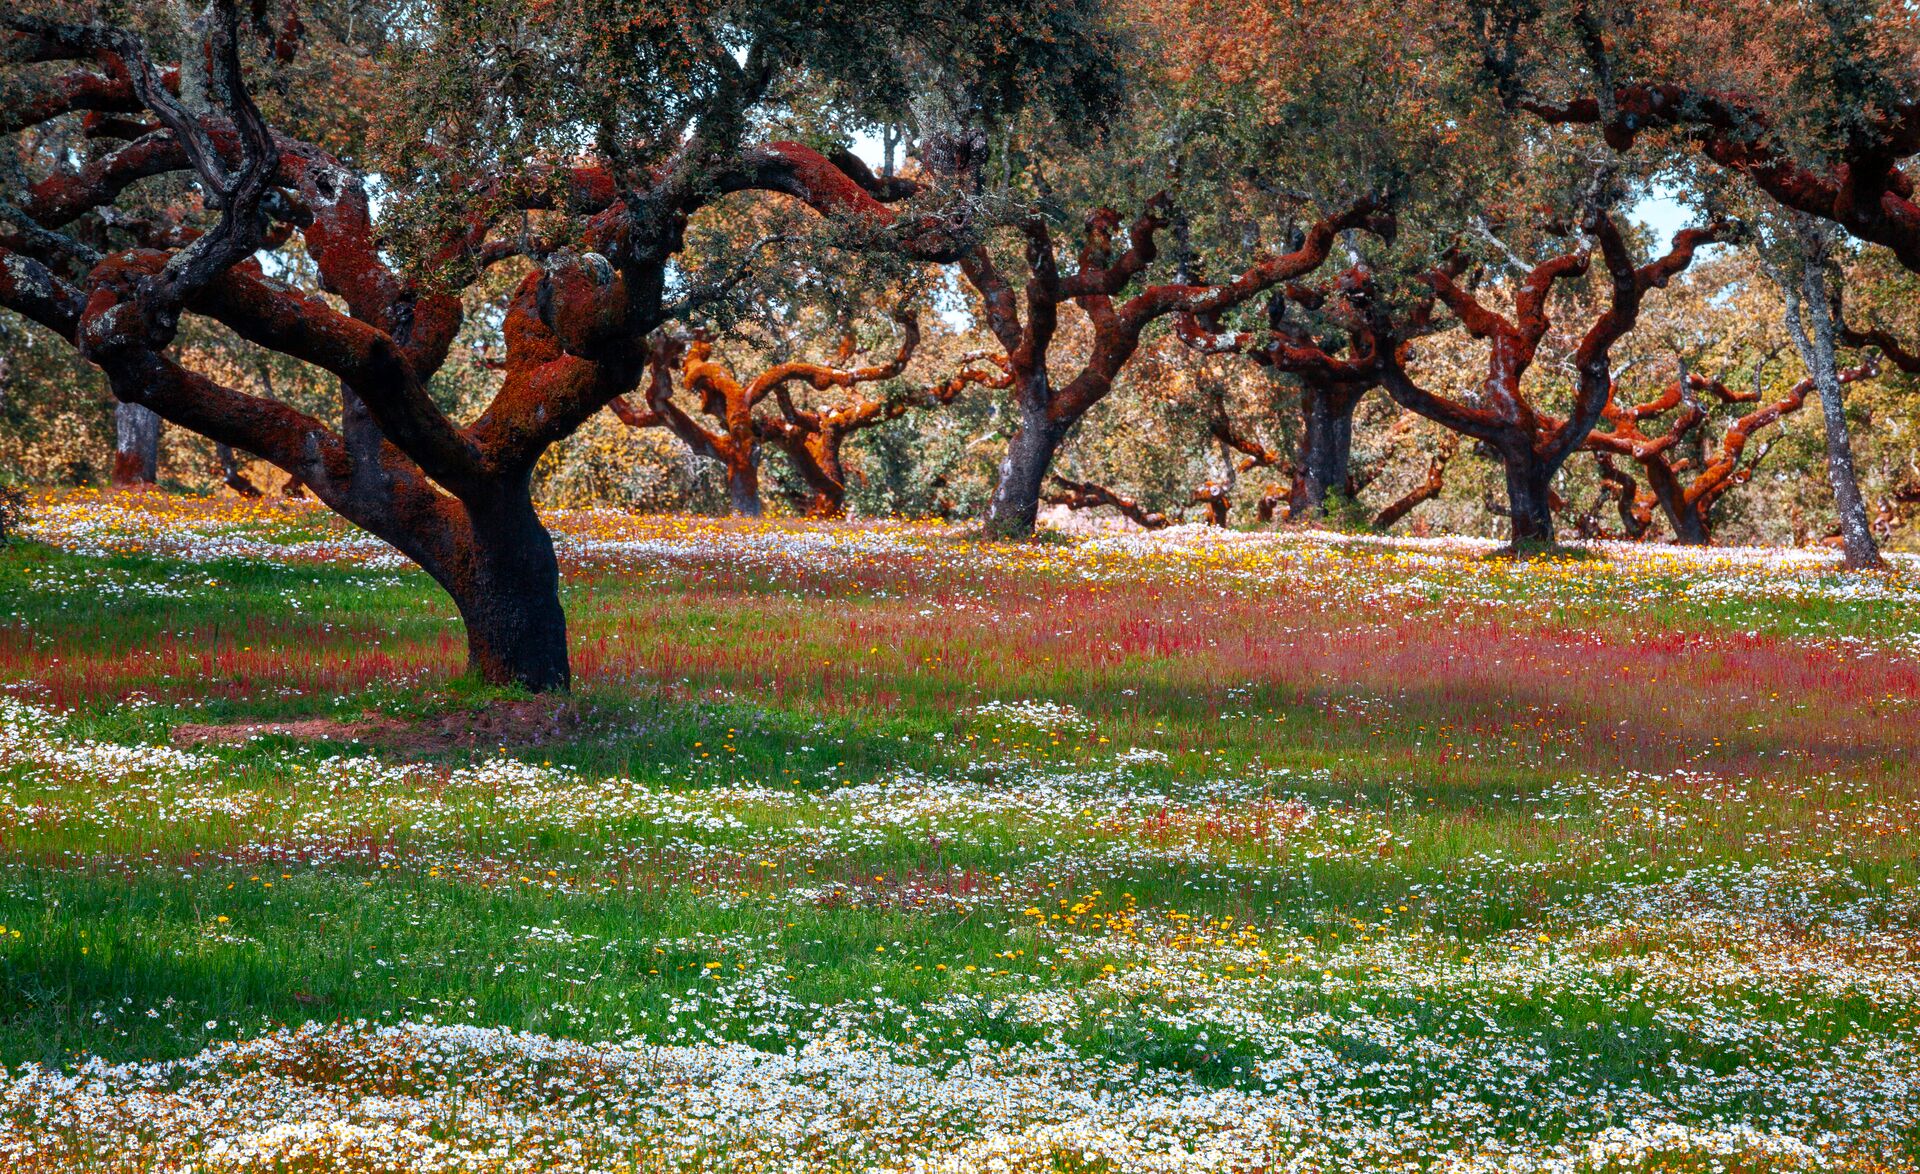 The cork trees for which Portugal is famous.